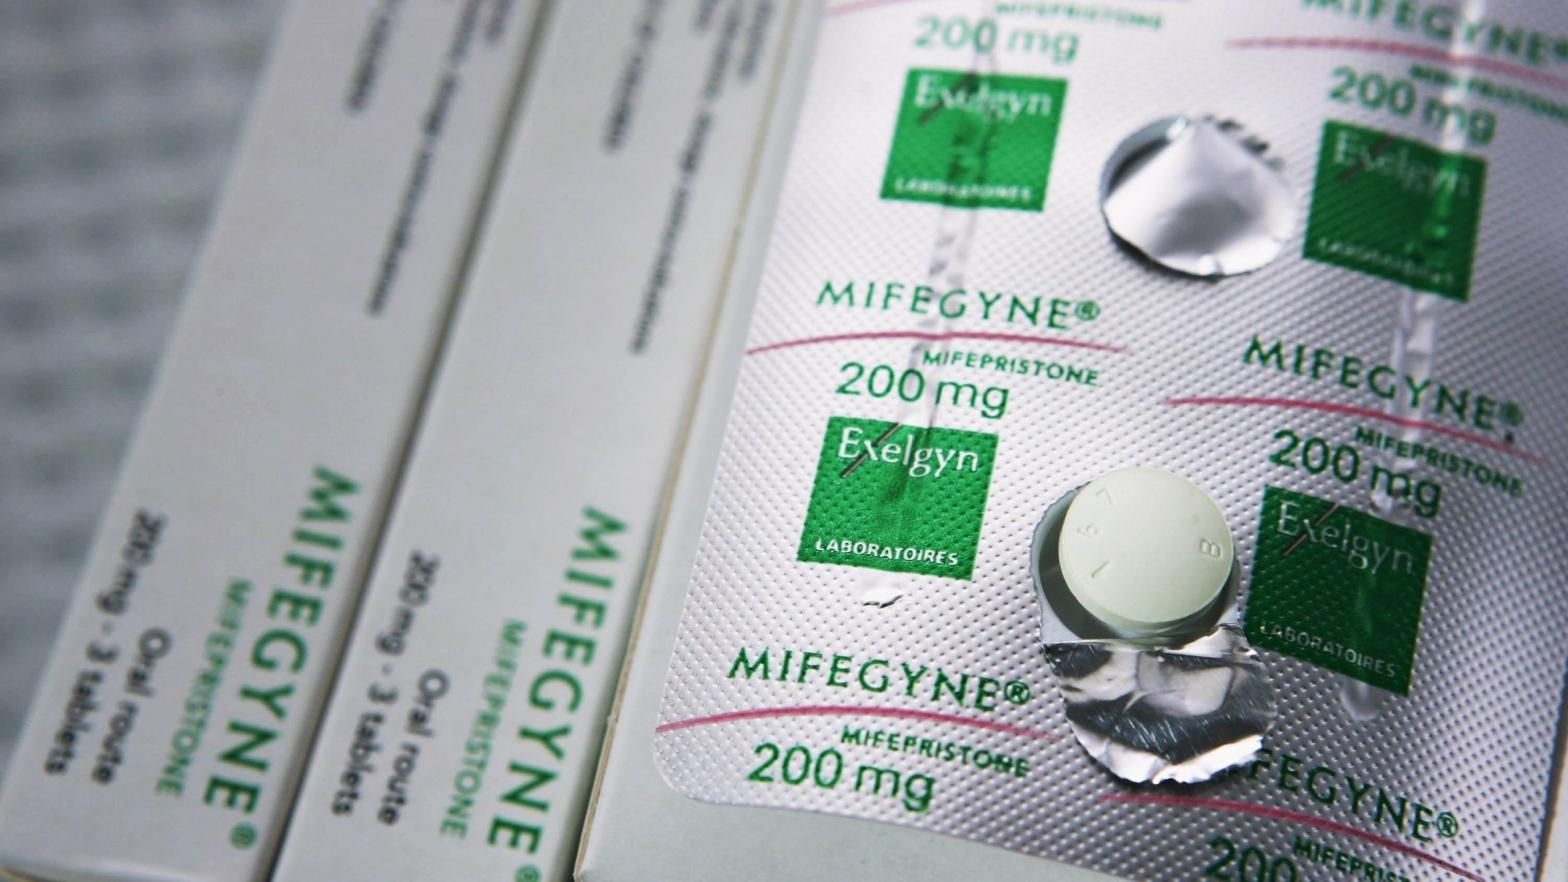 The abortion drug Mifepristone, also known as RU486, is pictured in an abortion clinic on February 17, 2006 in Auckland, New Zealand (Photo: Phil Walter, Getty Images)